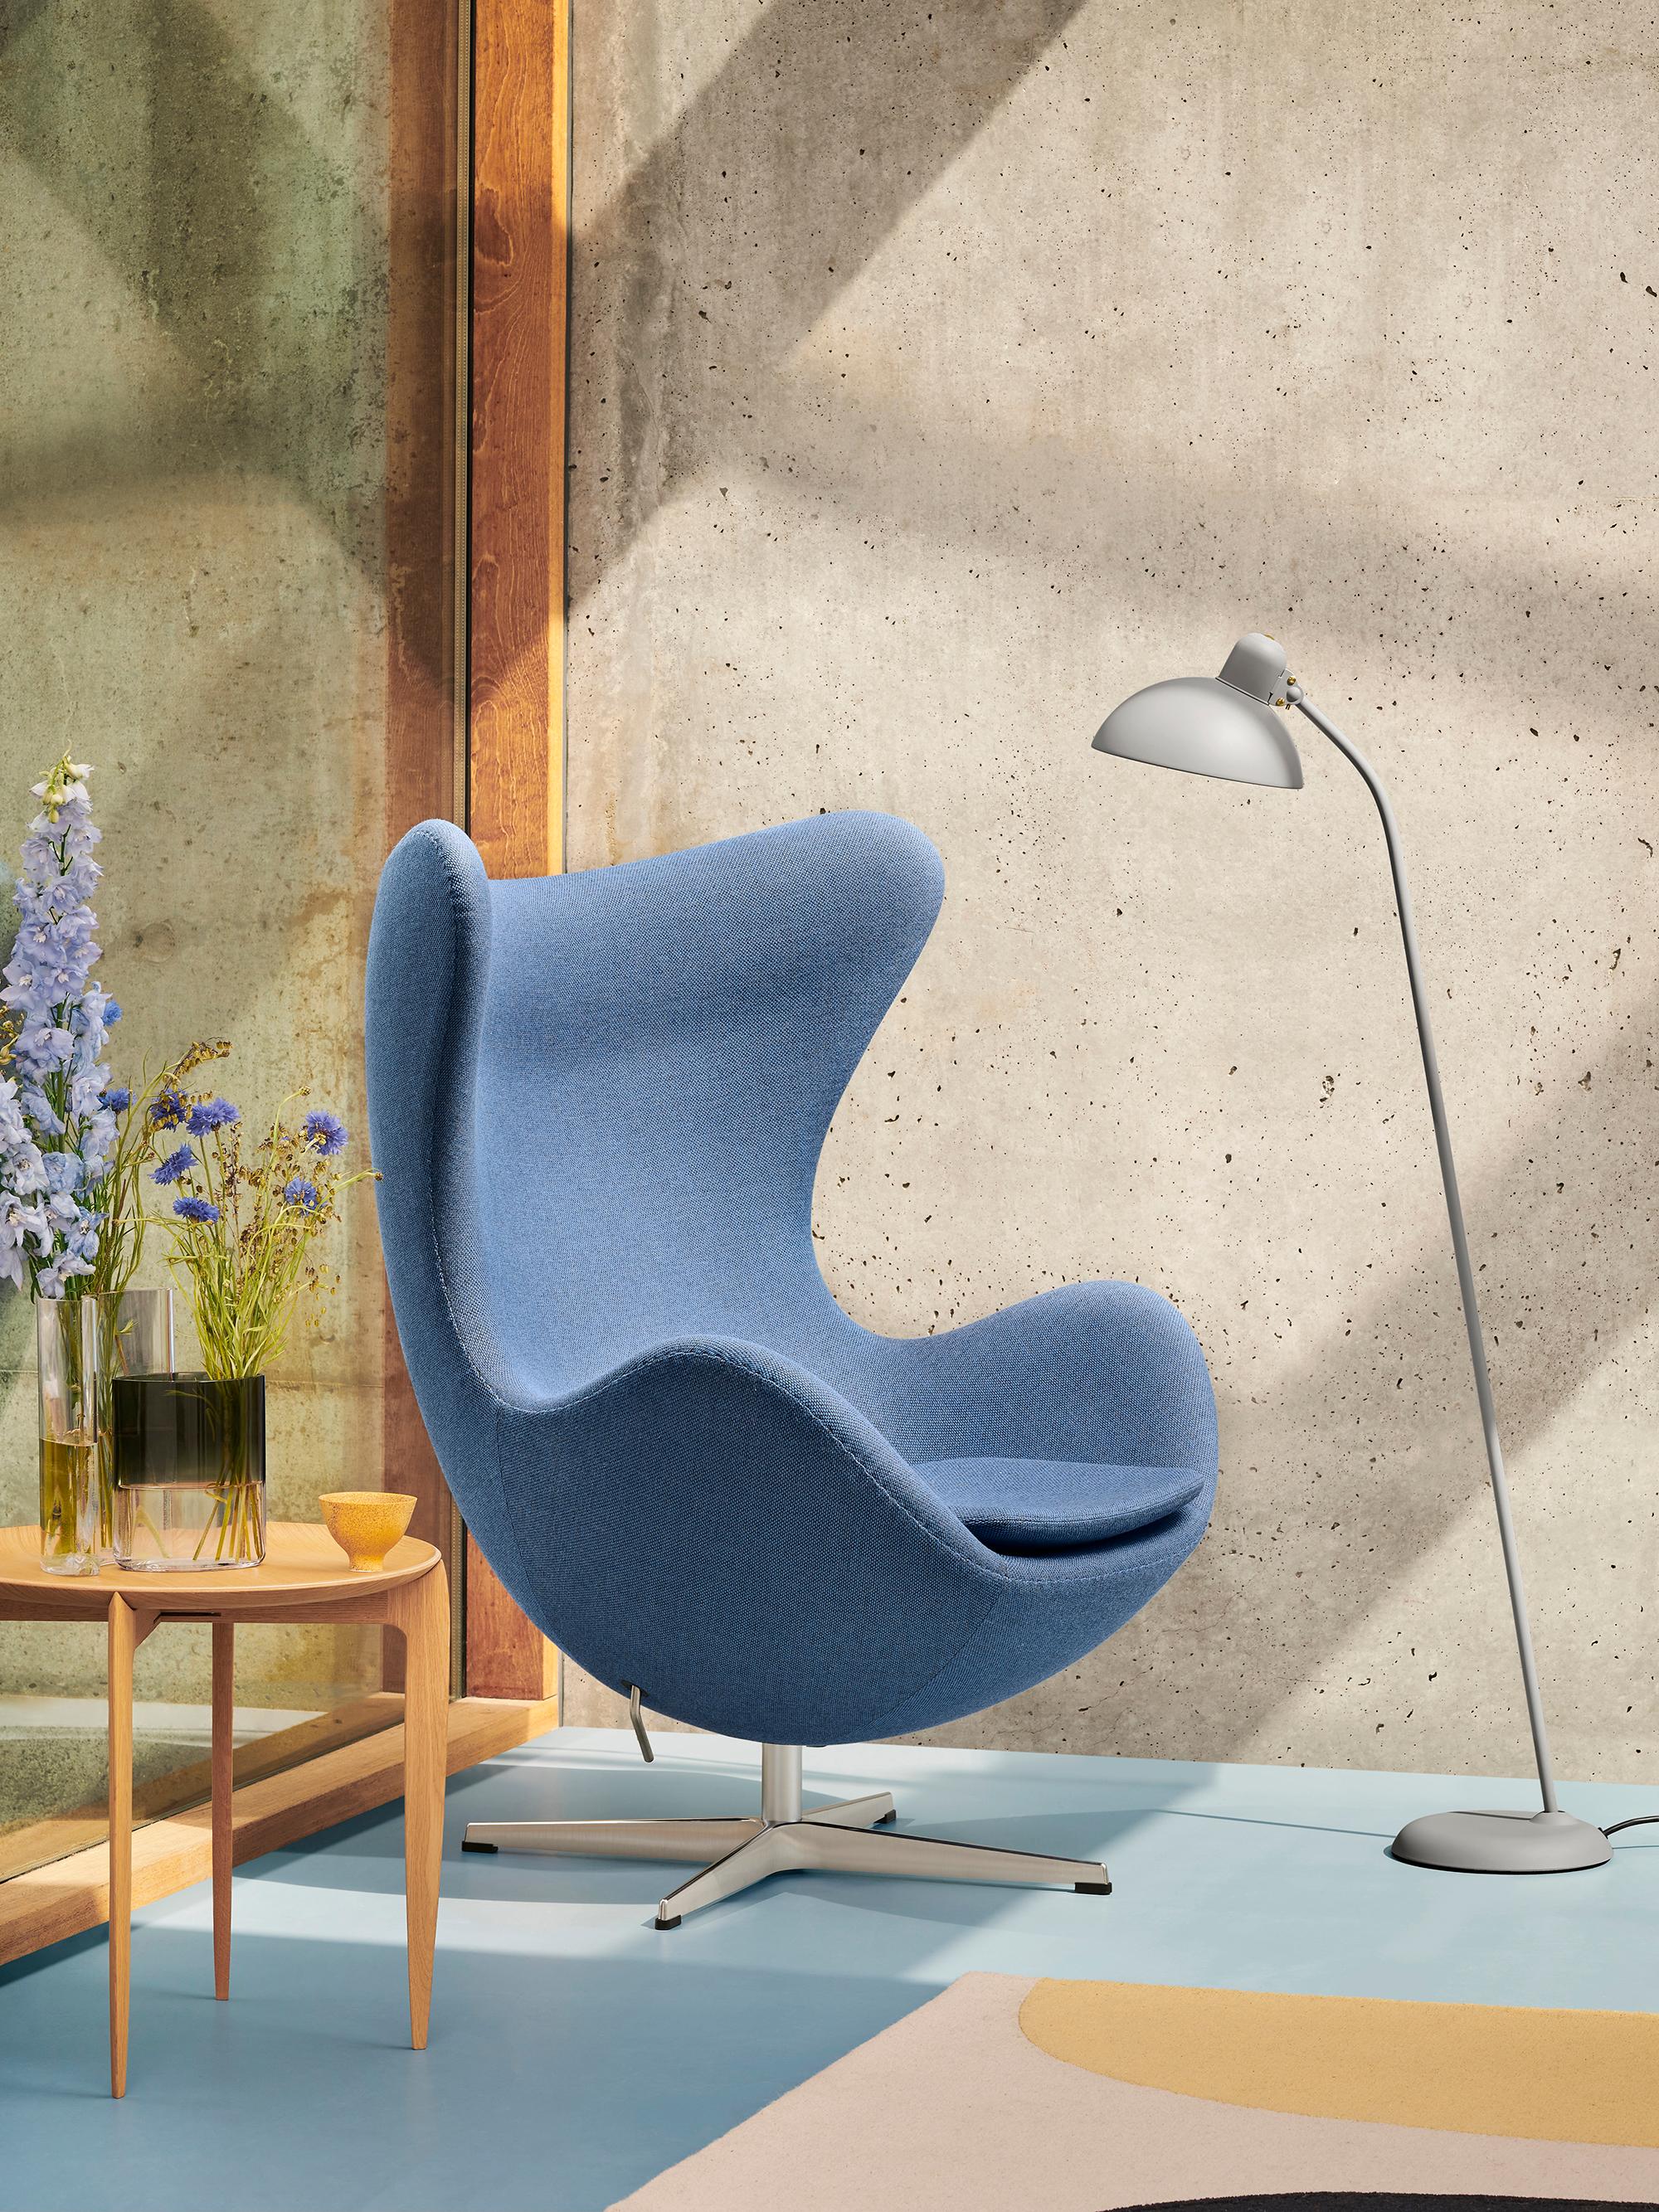 Arne Jacobsen 'Egg' Chair for Fritz Hansen in Fabric Upholstery (Cat. 2).

Established in 1872, Fritz Hansen has become synonymous with legendary Danish design. Combining timeless craftsmanship with an emphasis on sustainability, the brand’s